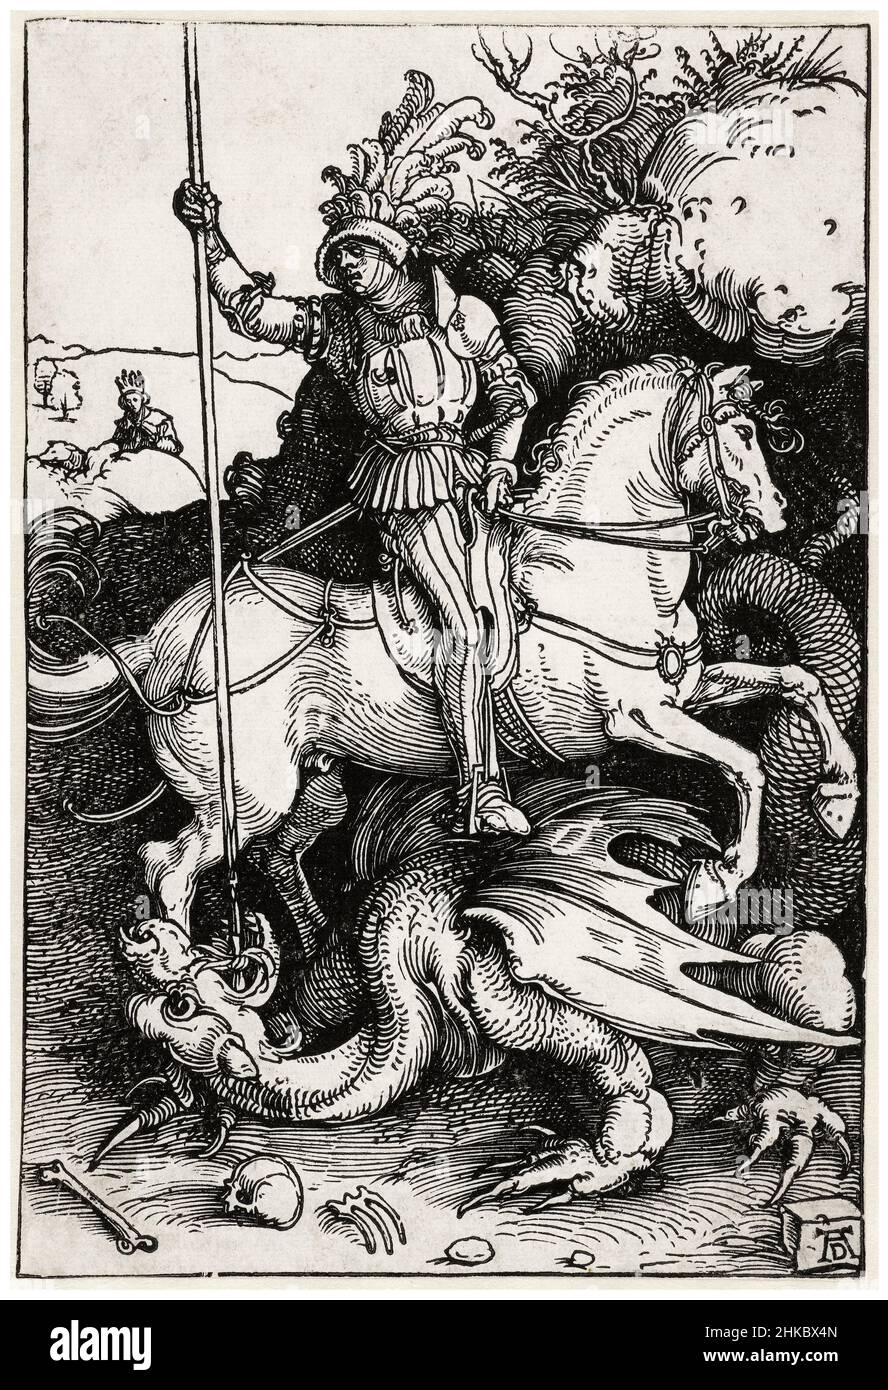 Saint George slaying the Dragon, woodcut print by Albrecht Durer, 1504-1505 Stock Photo